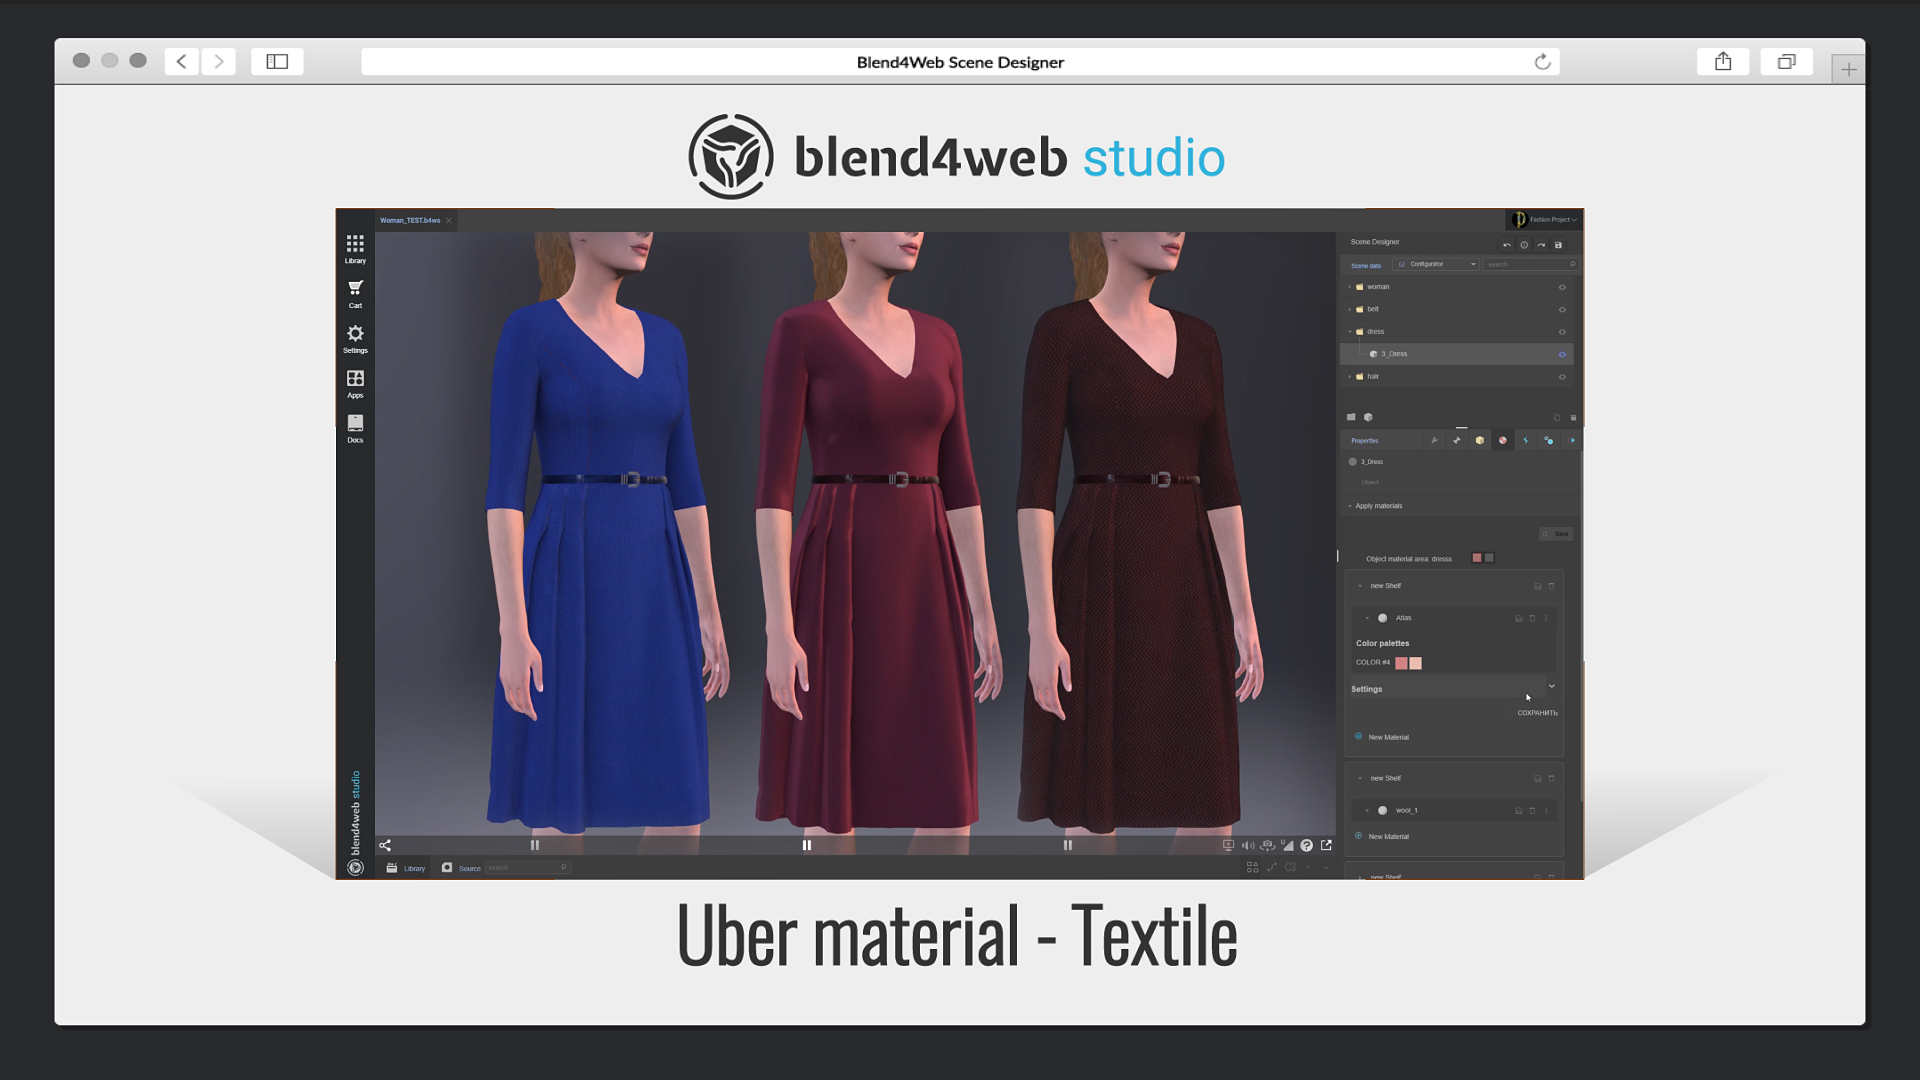 Blend4Web Studio: Uber material Textile - weaves, seams, imperfections, fluffiness